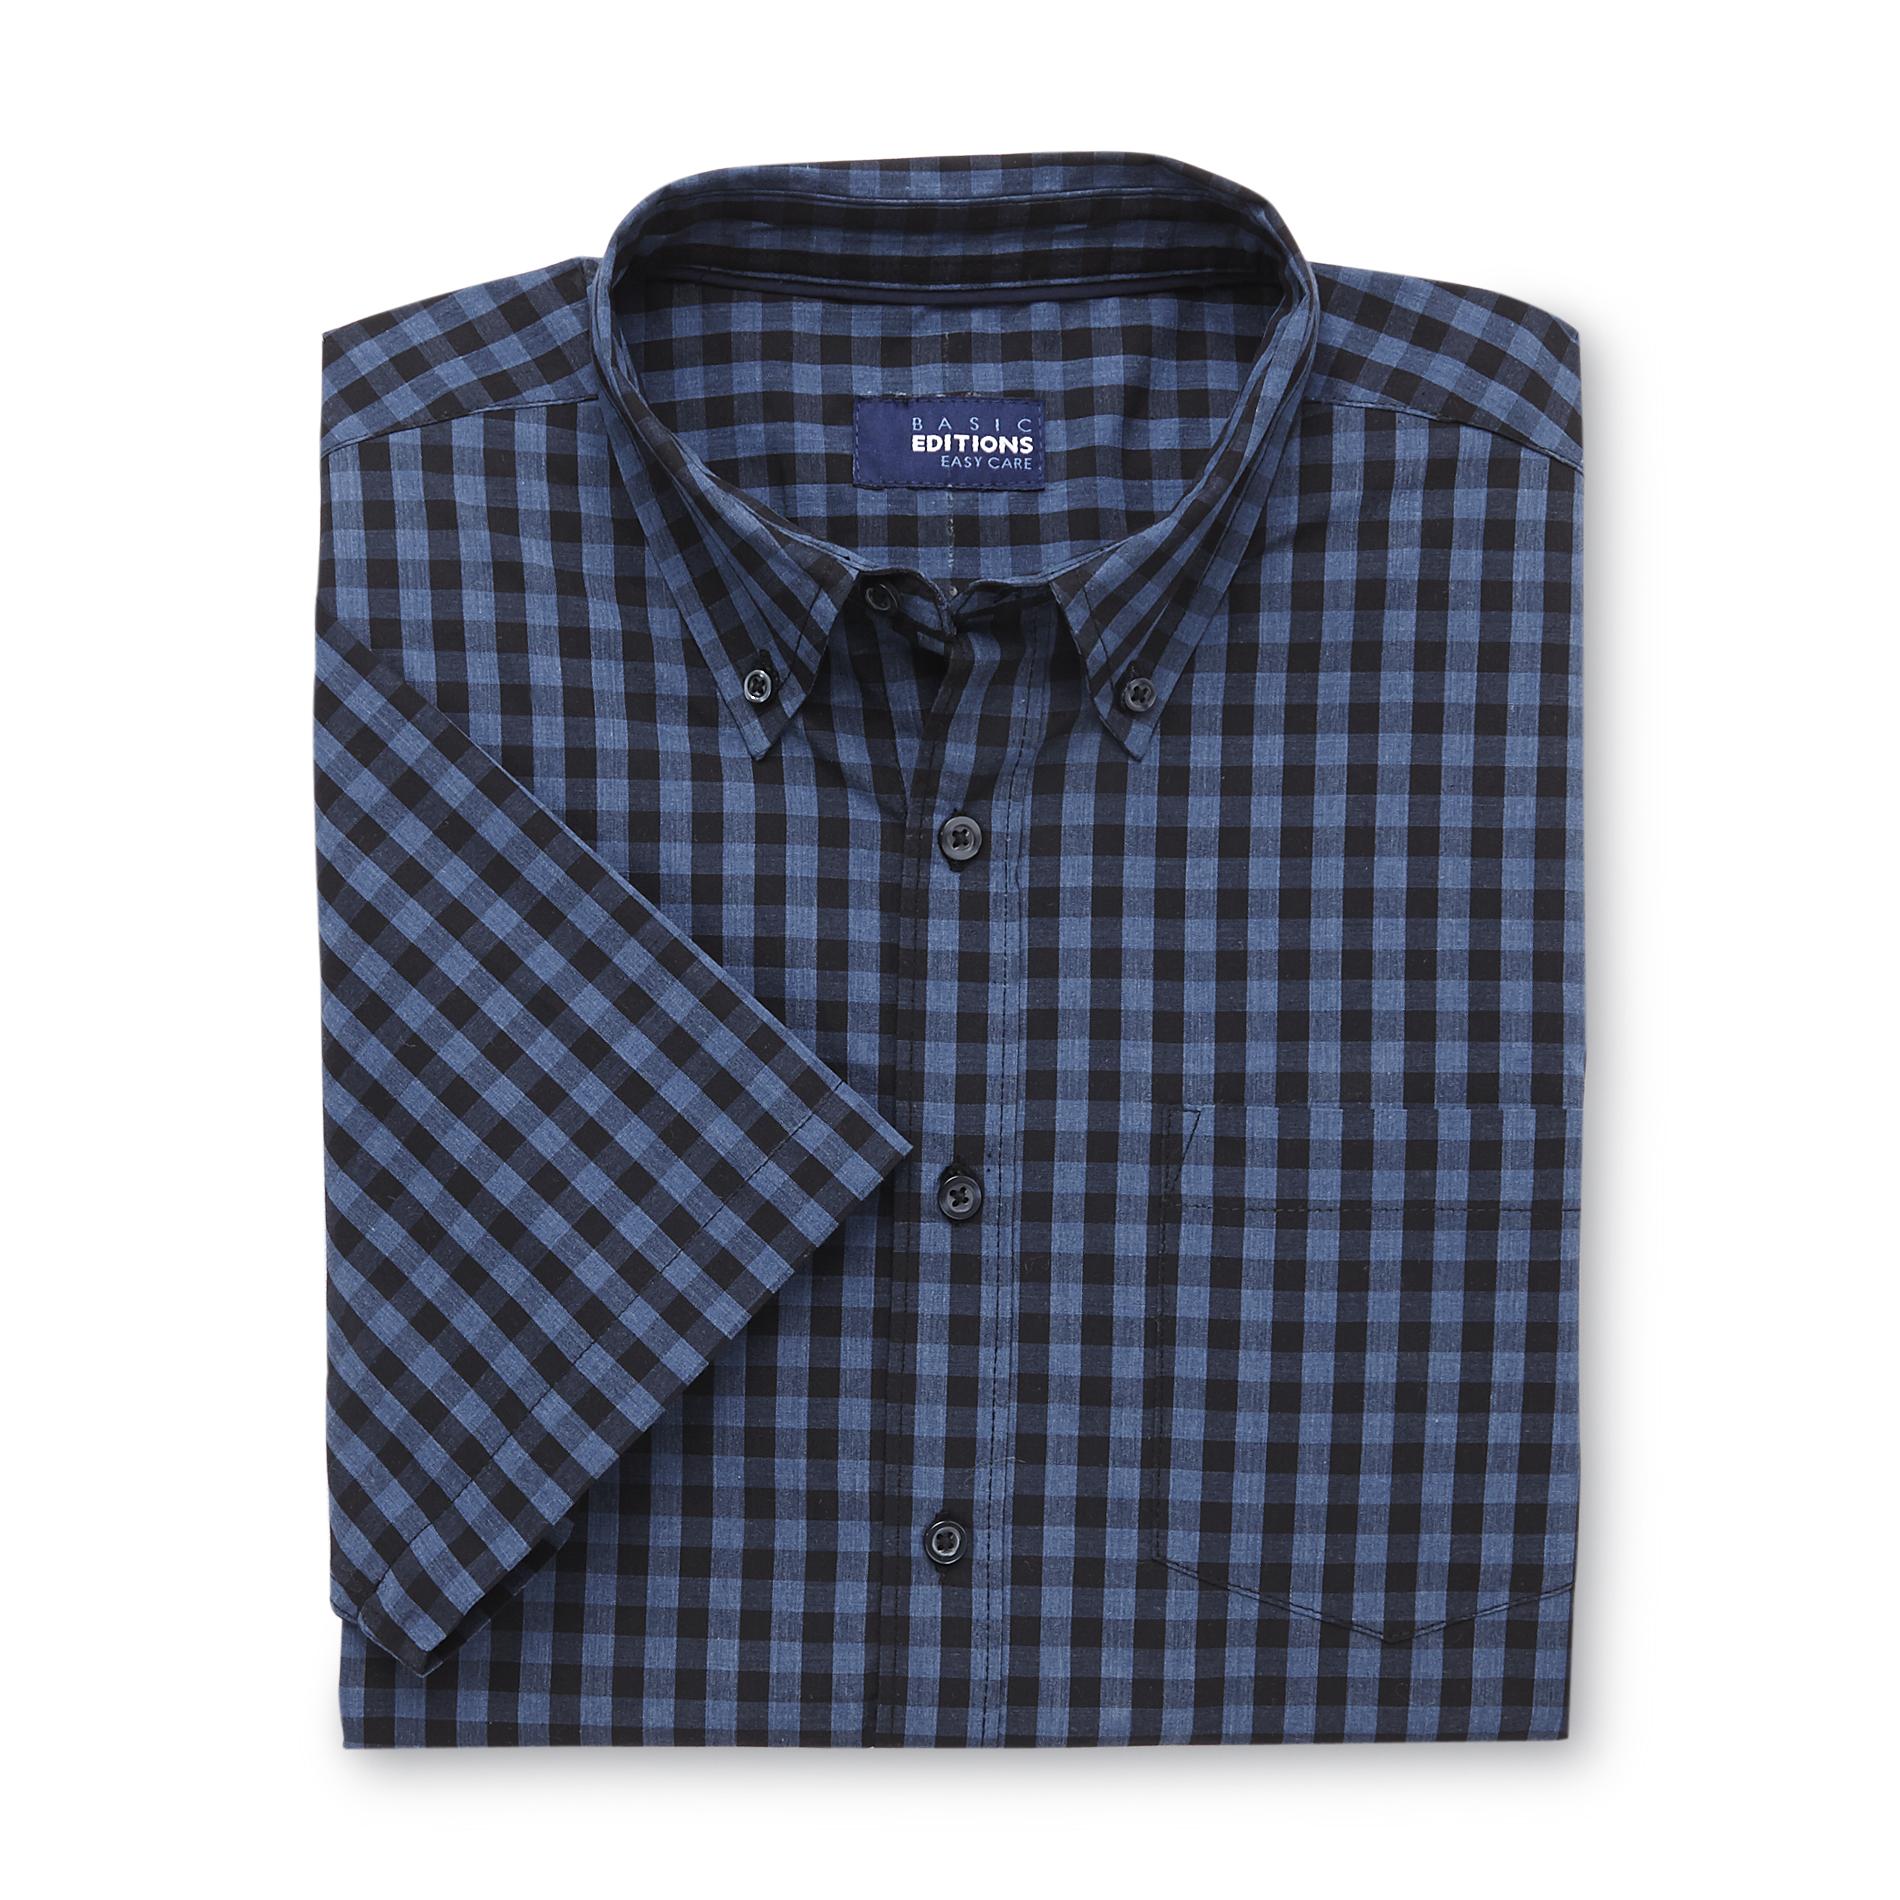 Basic Editions Men's Short-Sleeve Button-Front Shirt - Gingham